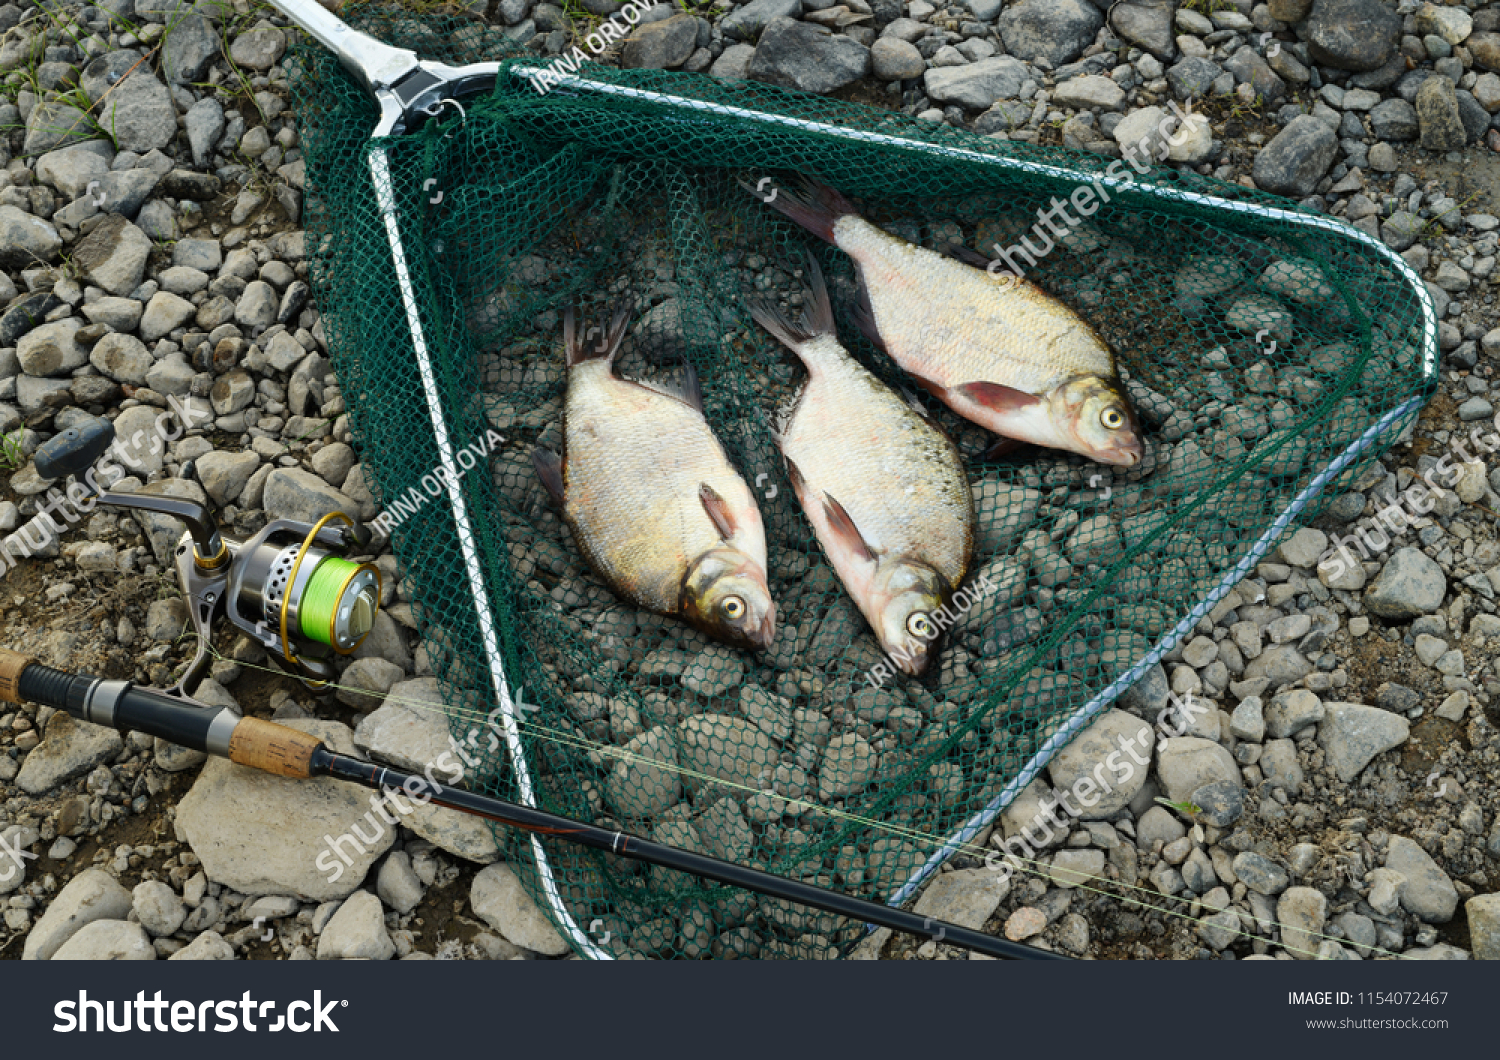 The catch and the fishing gear are on a riverbank on a gray pebble. Three caught fishes are lying in a green landing net next to a black rod is equipped with a reel and a cord of light green color. #1154072467